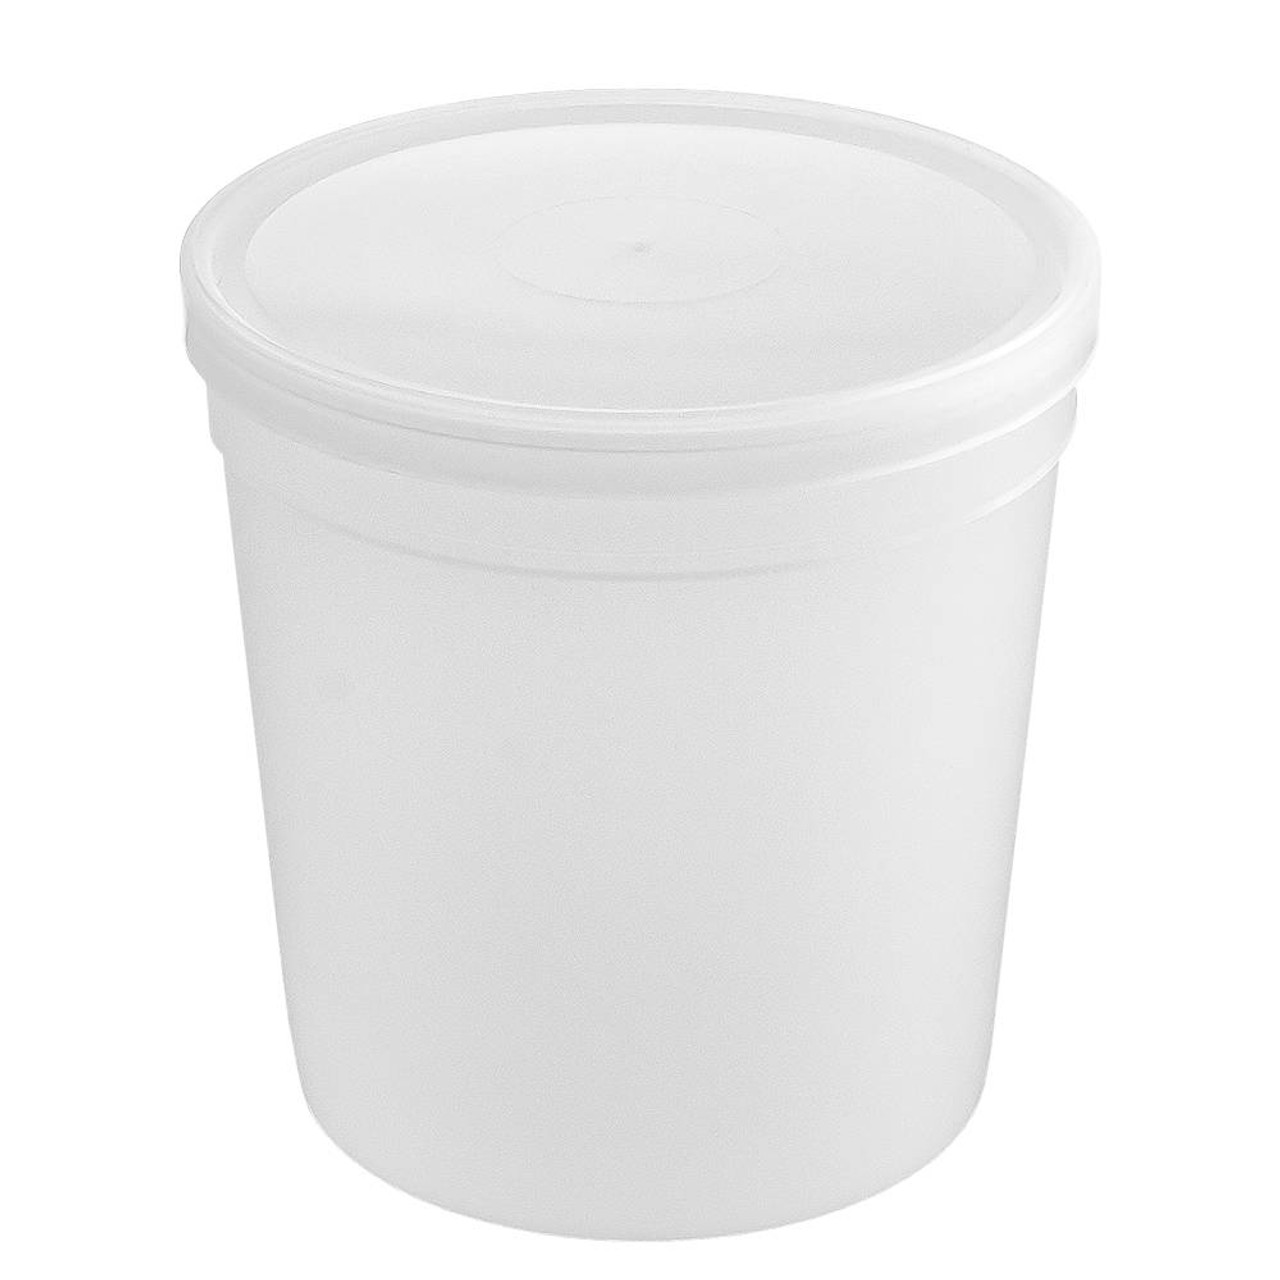 1/4 Gallon (32 oz.) BPA Free Food Grade Round Container with Lid (T41032) -  starting quantity 25 count - FREE SHIPPING - ePackageSupply